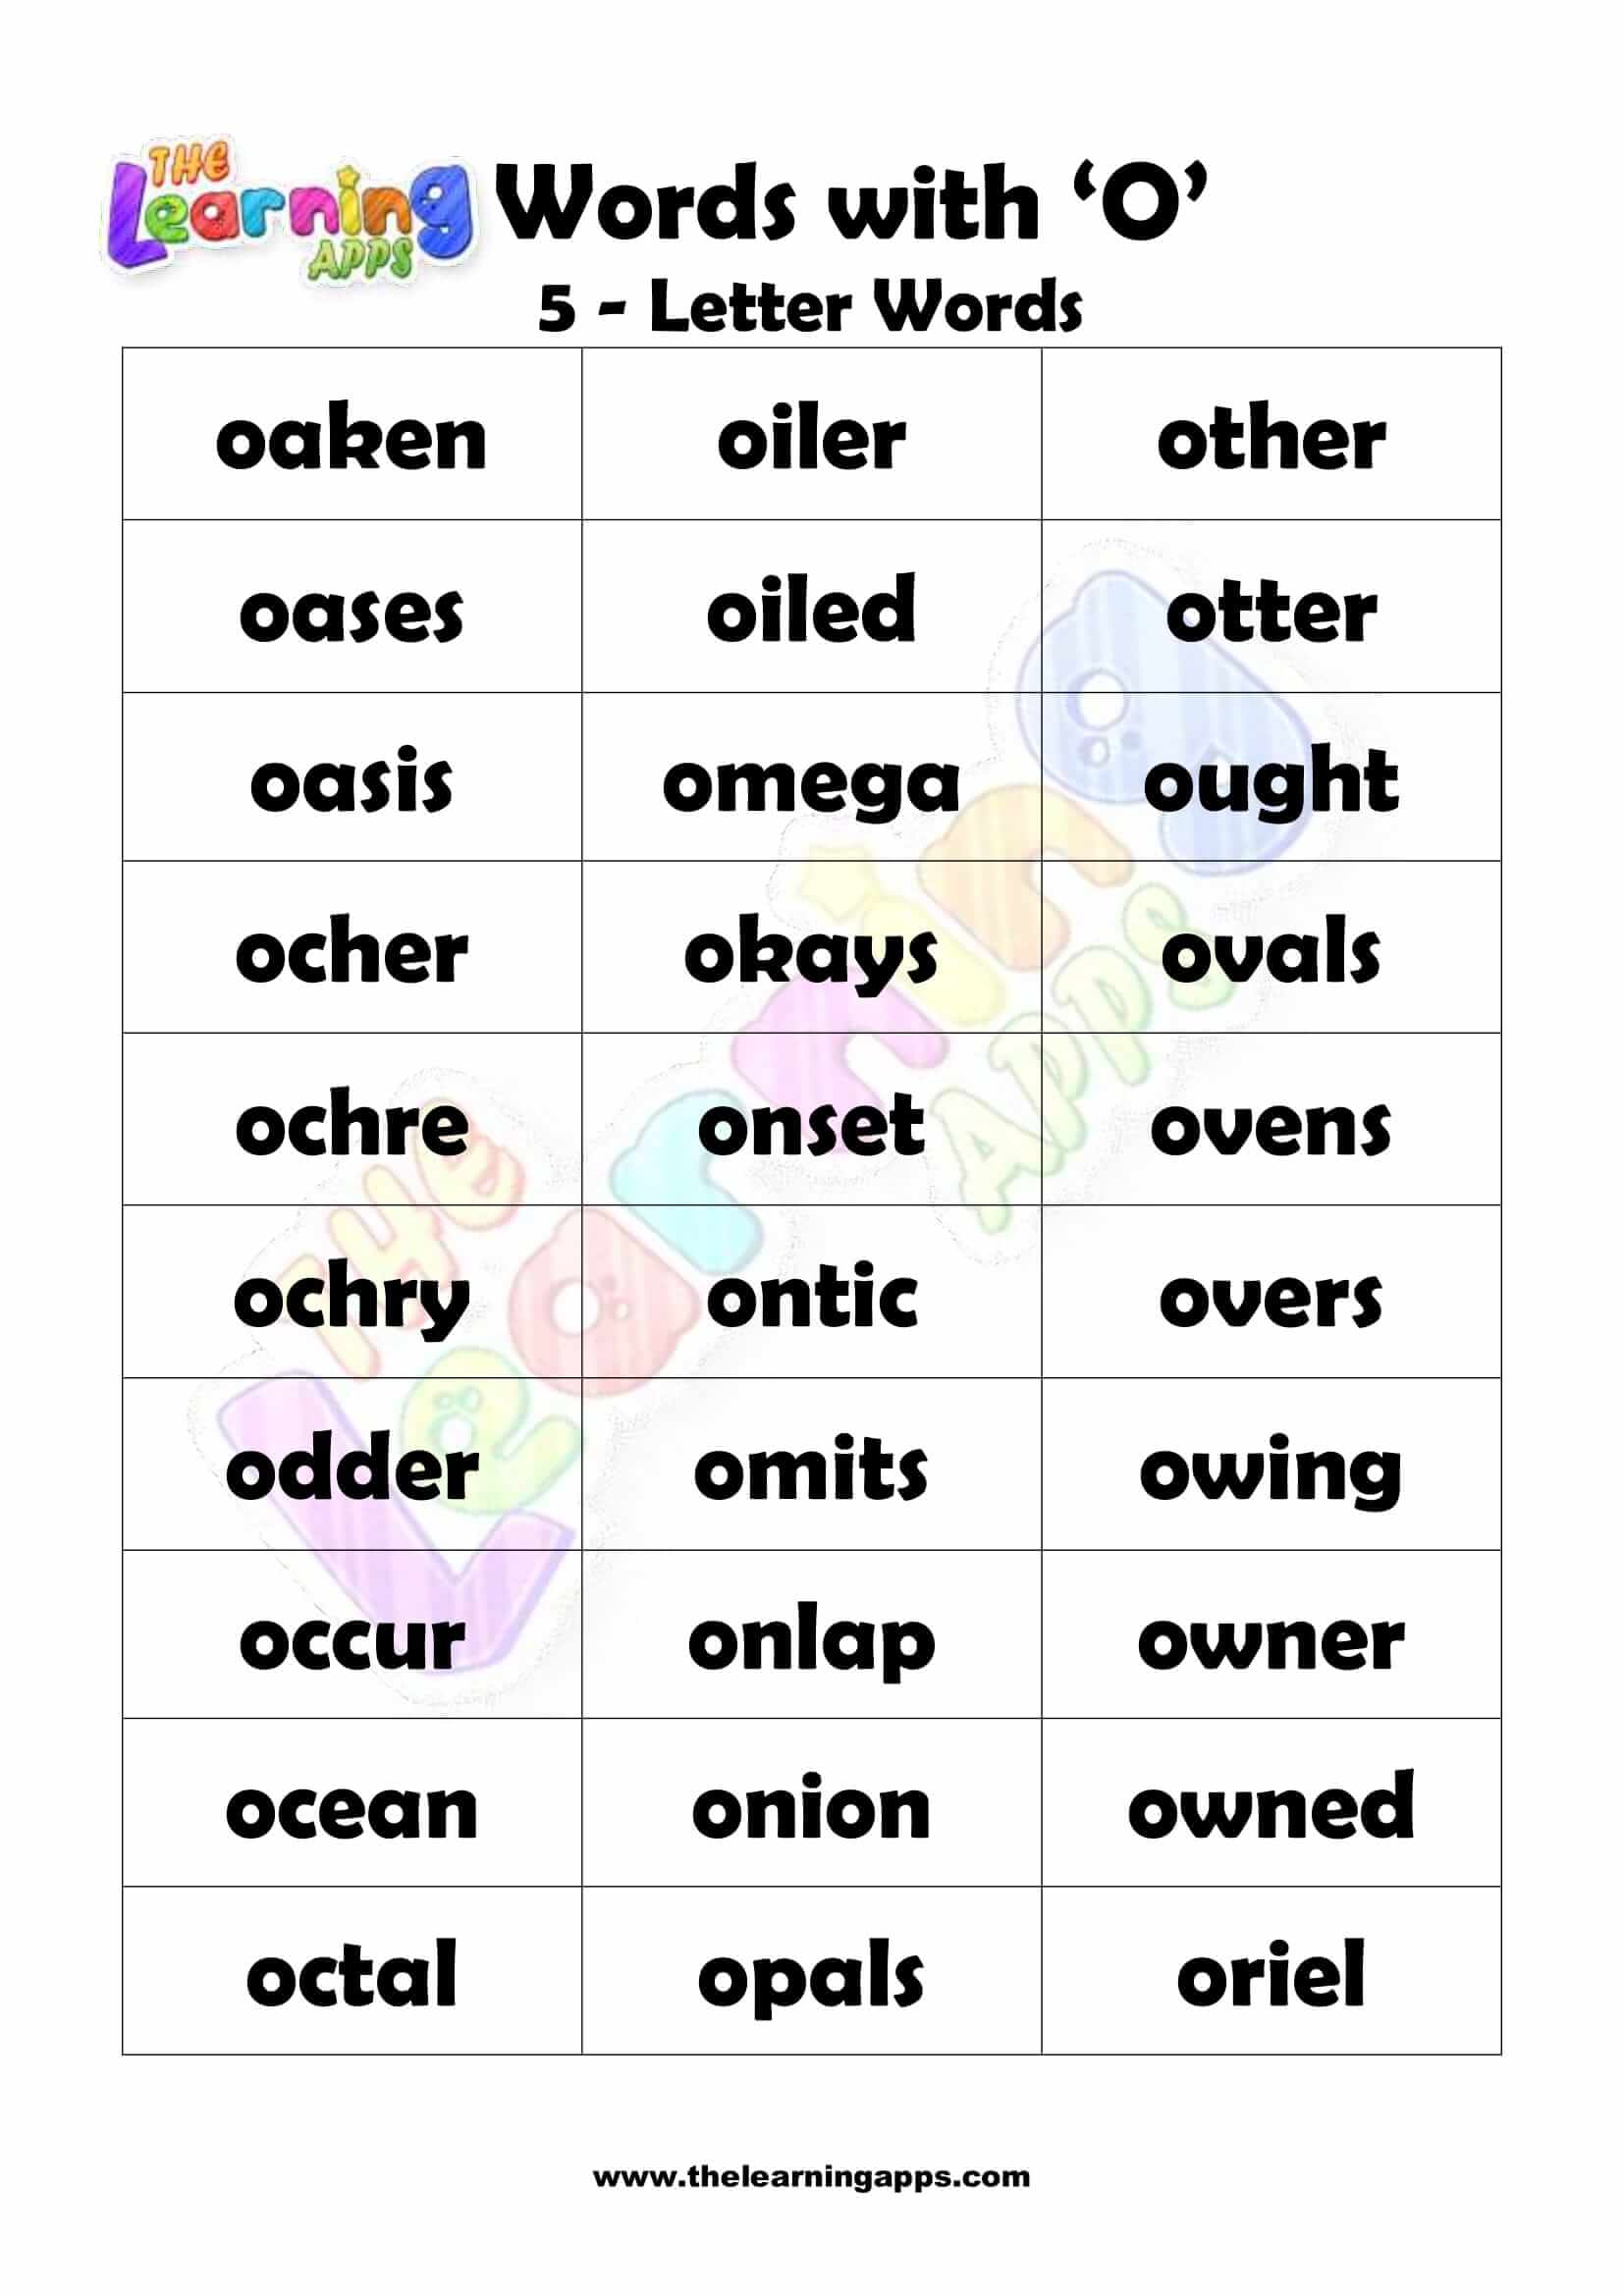 5 LETTER WORD STARTING WITH O